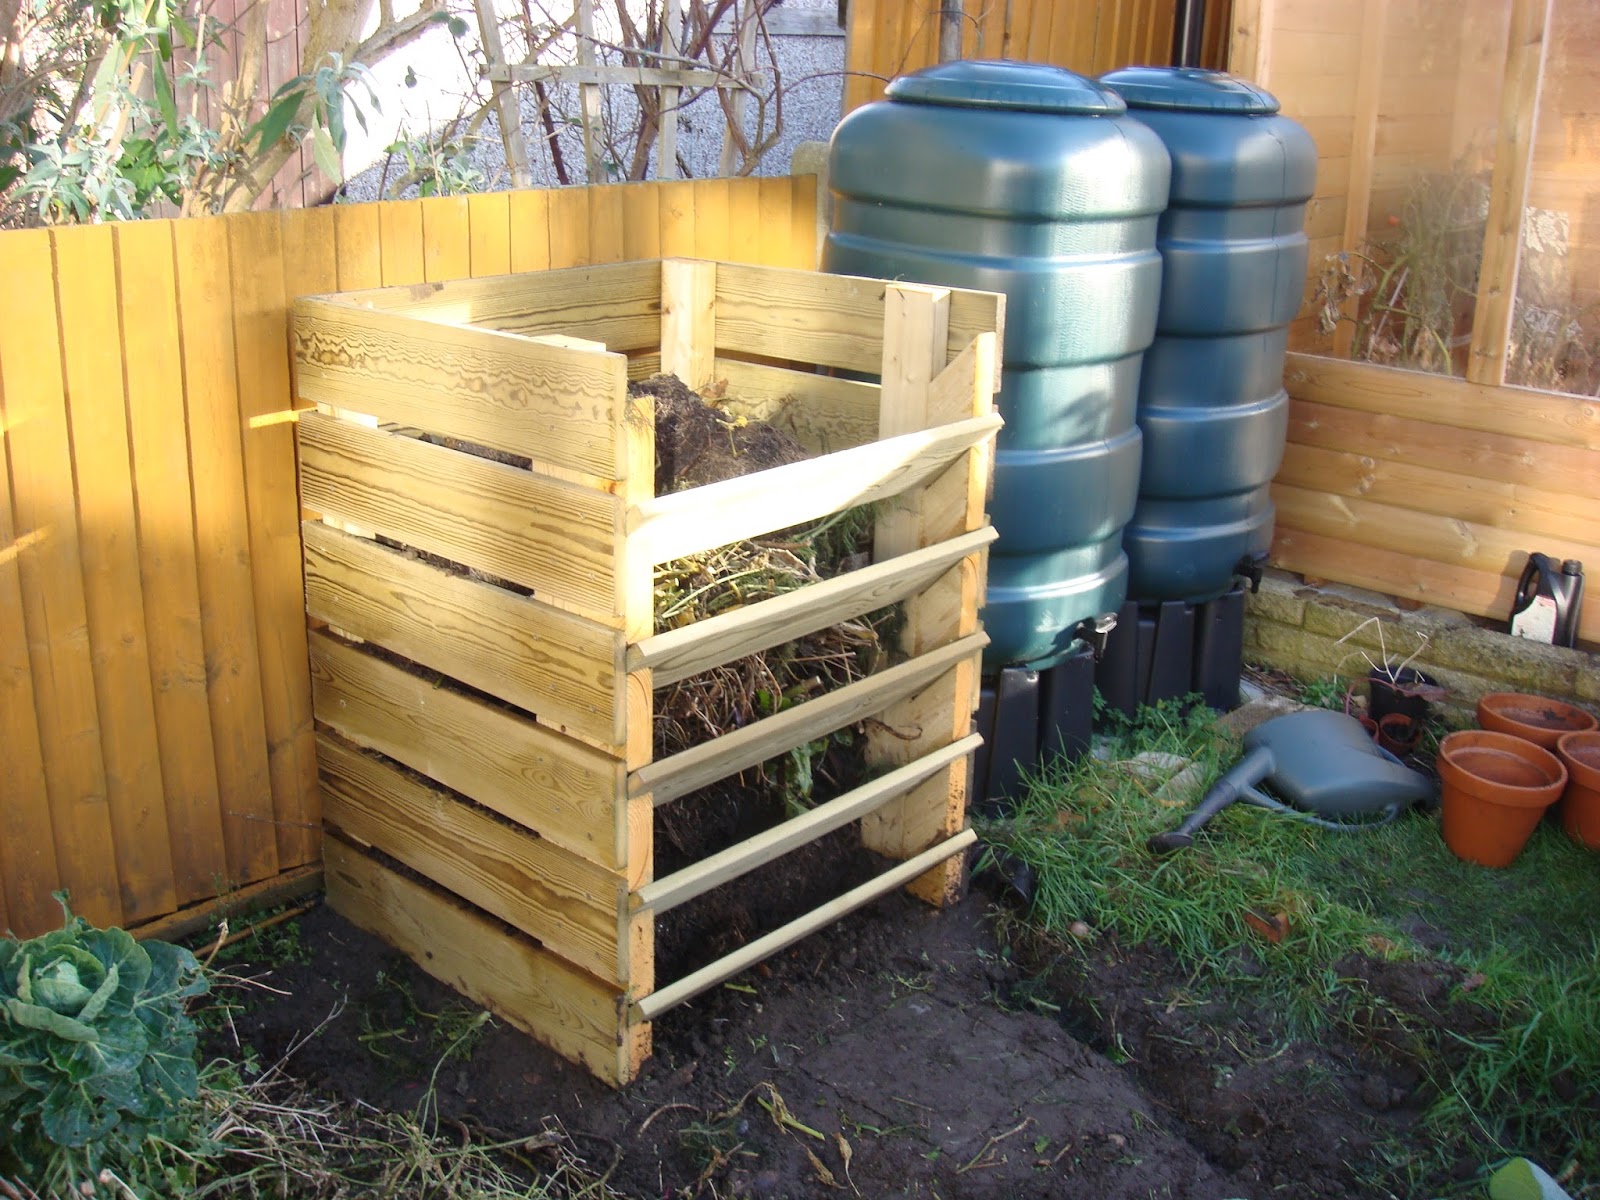 Veg patch from scratch: How to make your own wooden 